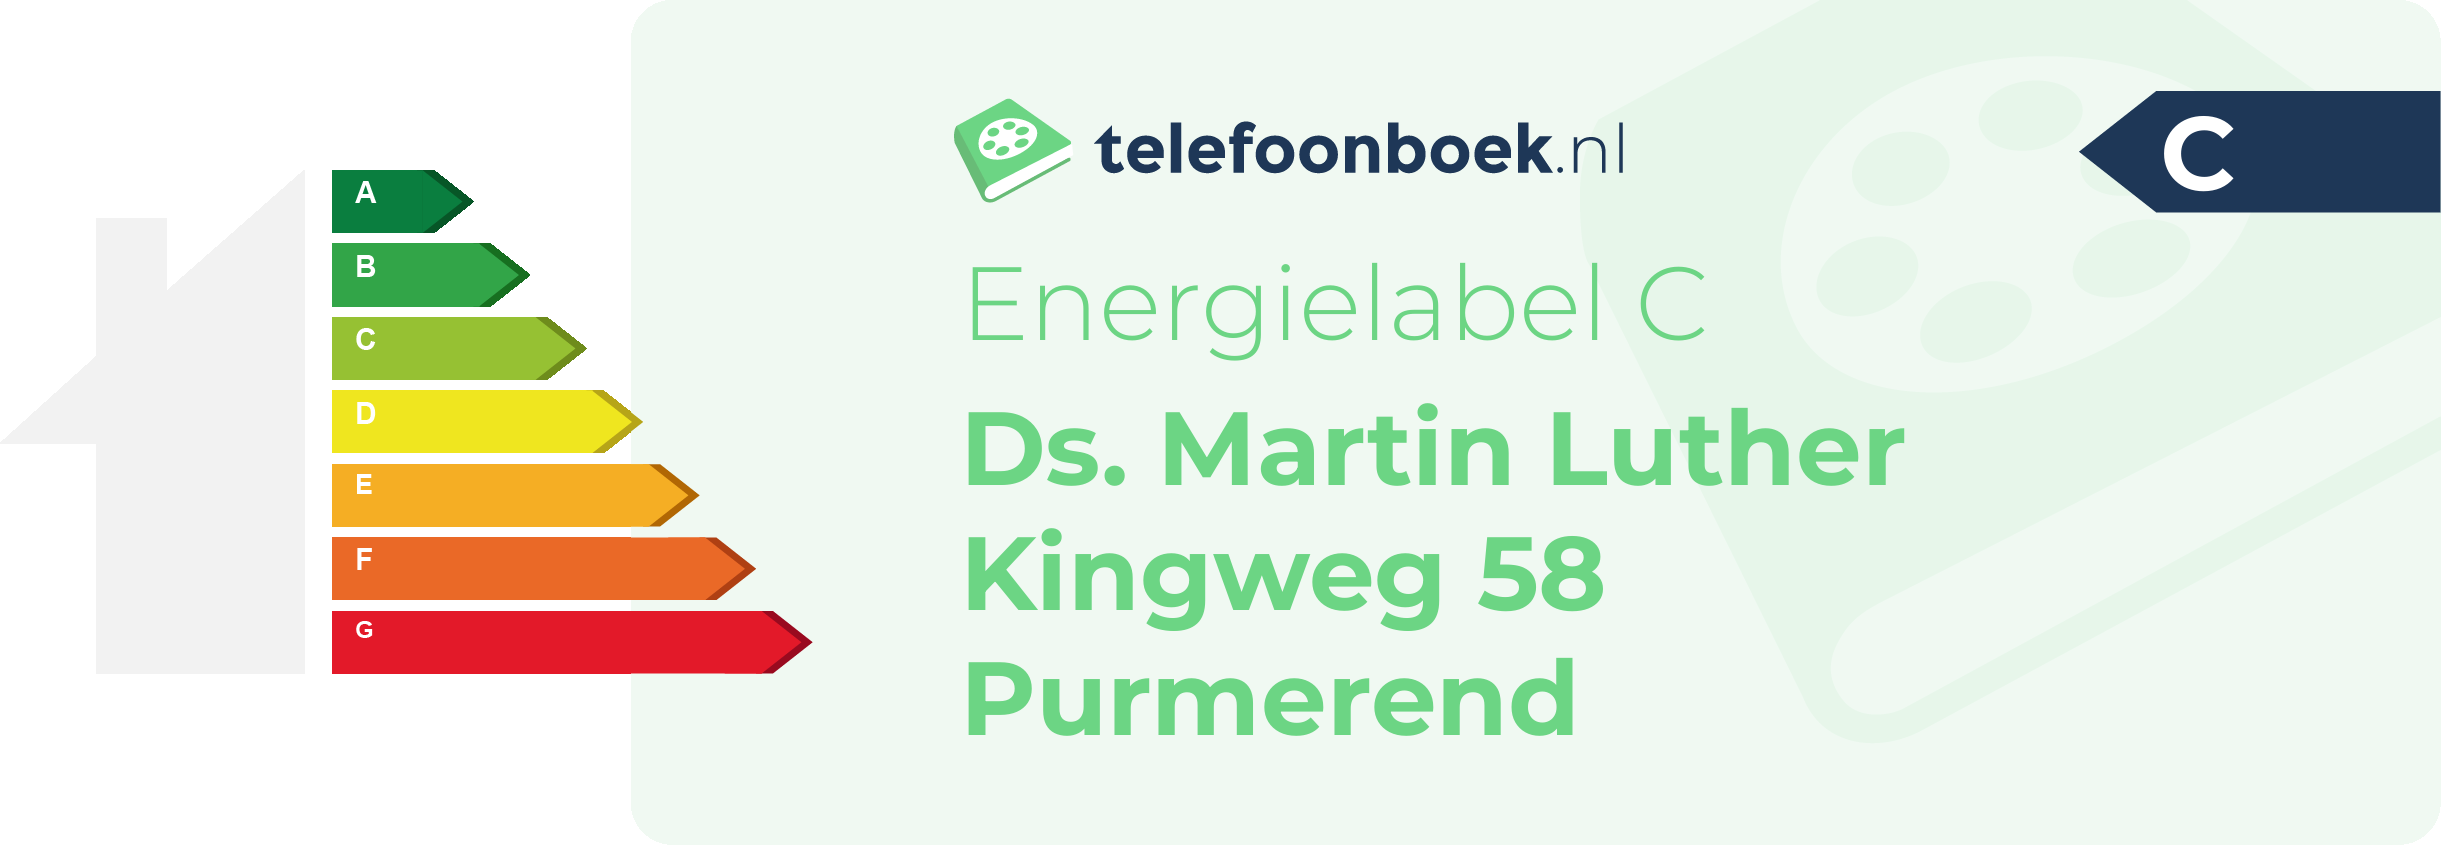 Energielabel Ds. Martin Luther Kingweg 58 Purmerend